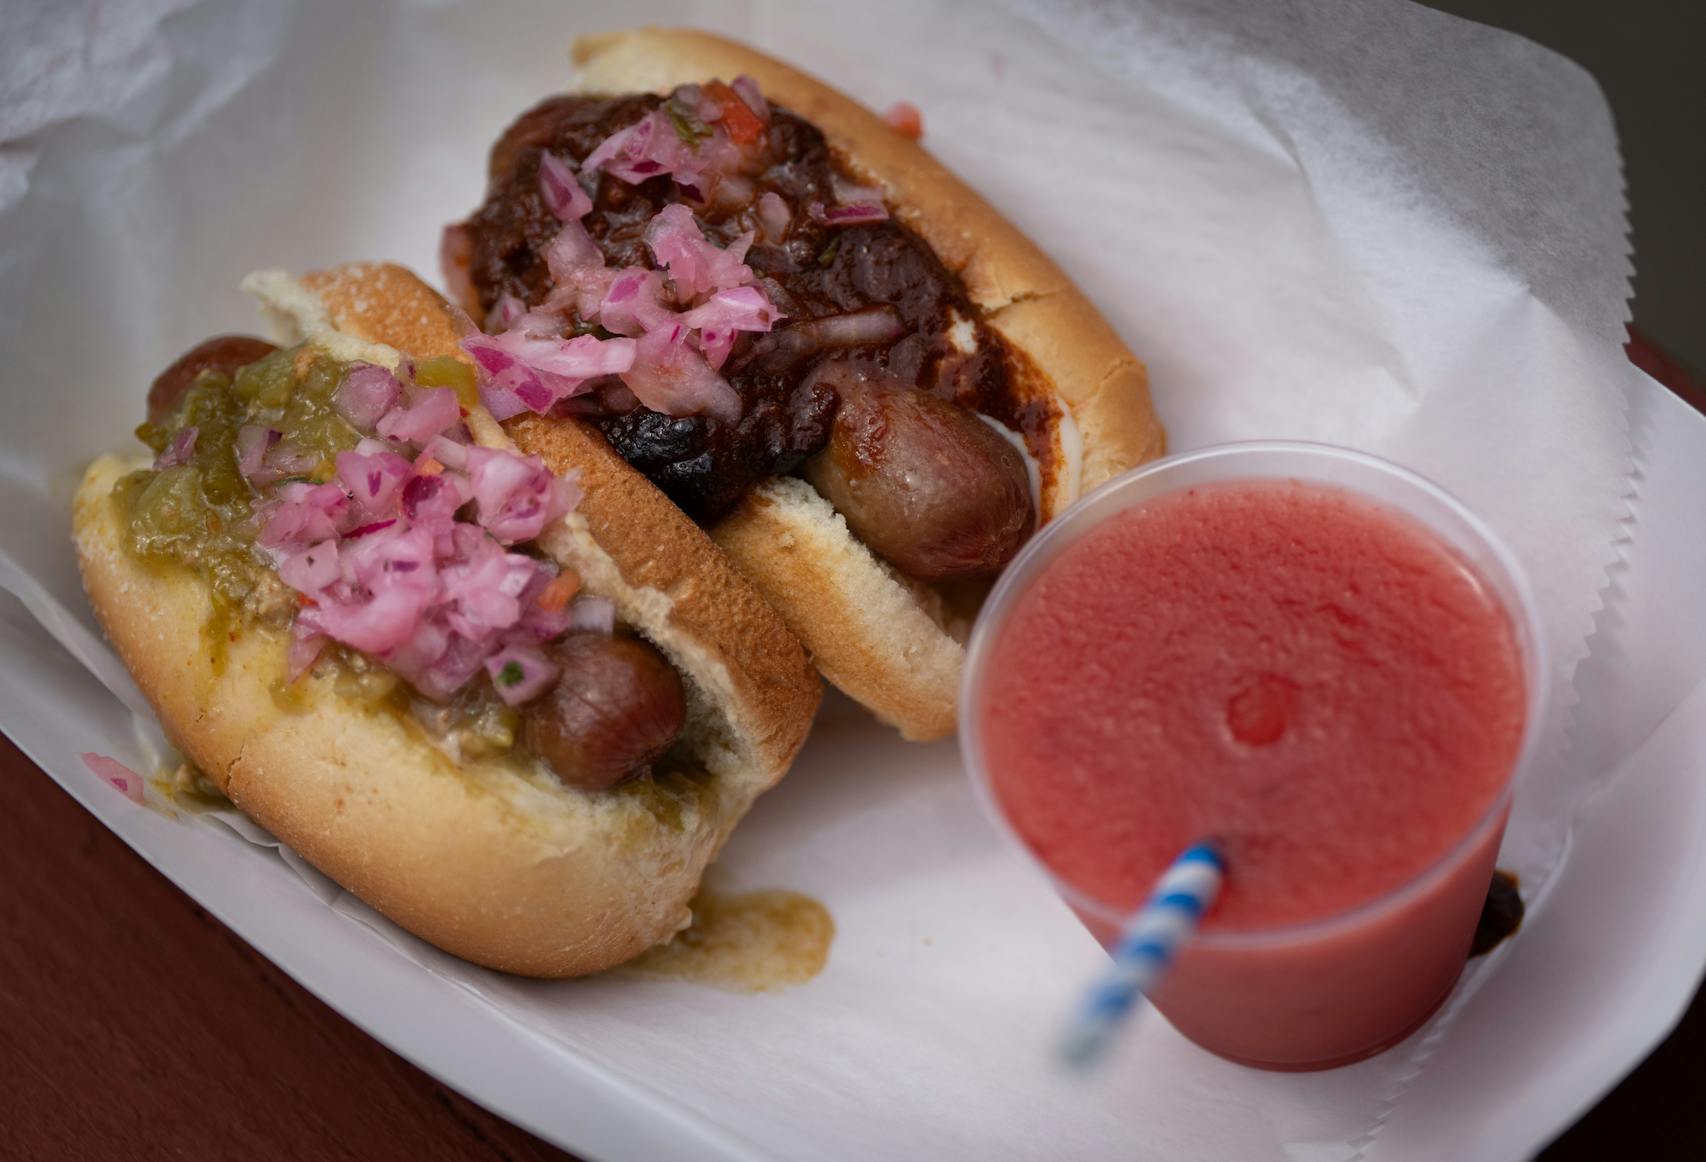 New Mexico Chile Dog Sliders Two Ways from Blue Moon Dine-In Theater. New foods at the Minnesota State Fair photographed on Thursday, Aug. 25, 2022 in Falcon Heights, Minn. ] RENEE JONES SCHNEIDER • renee.jones@startribune.com